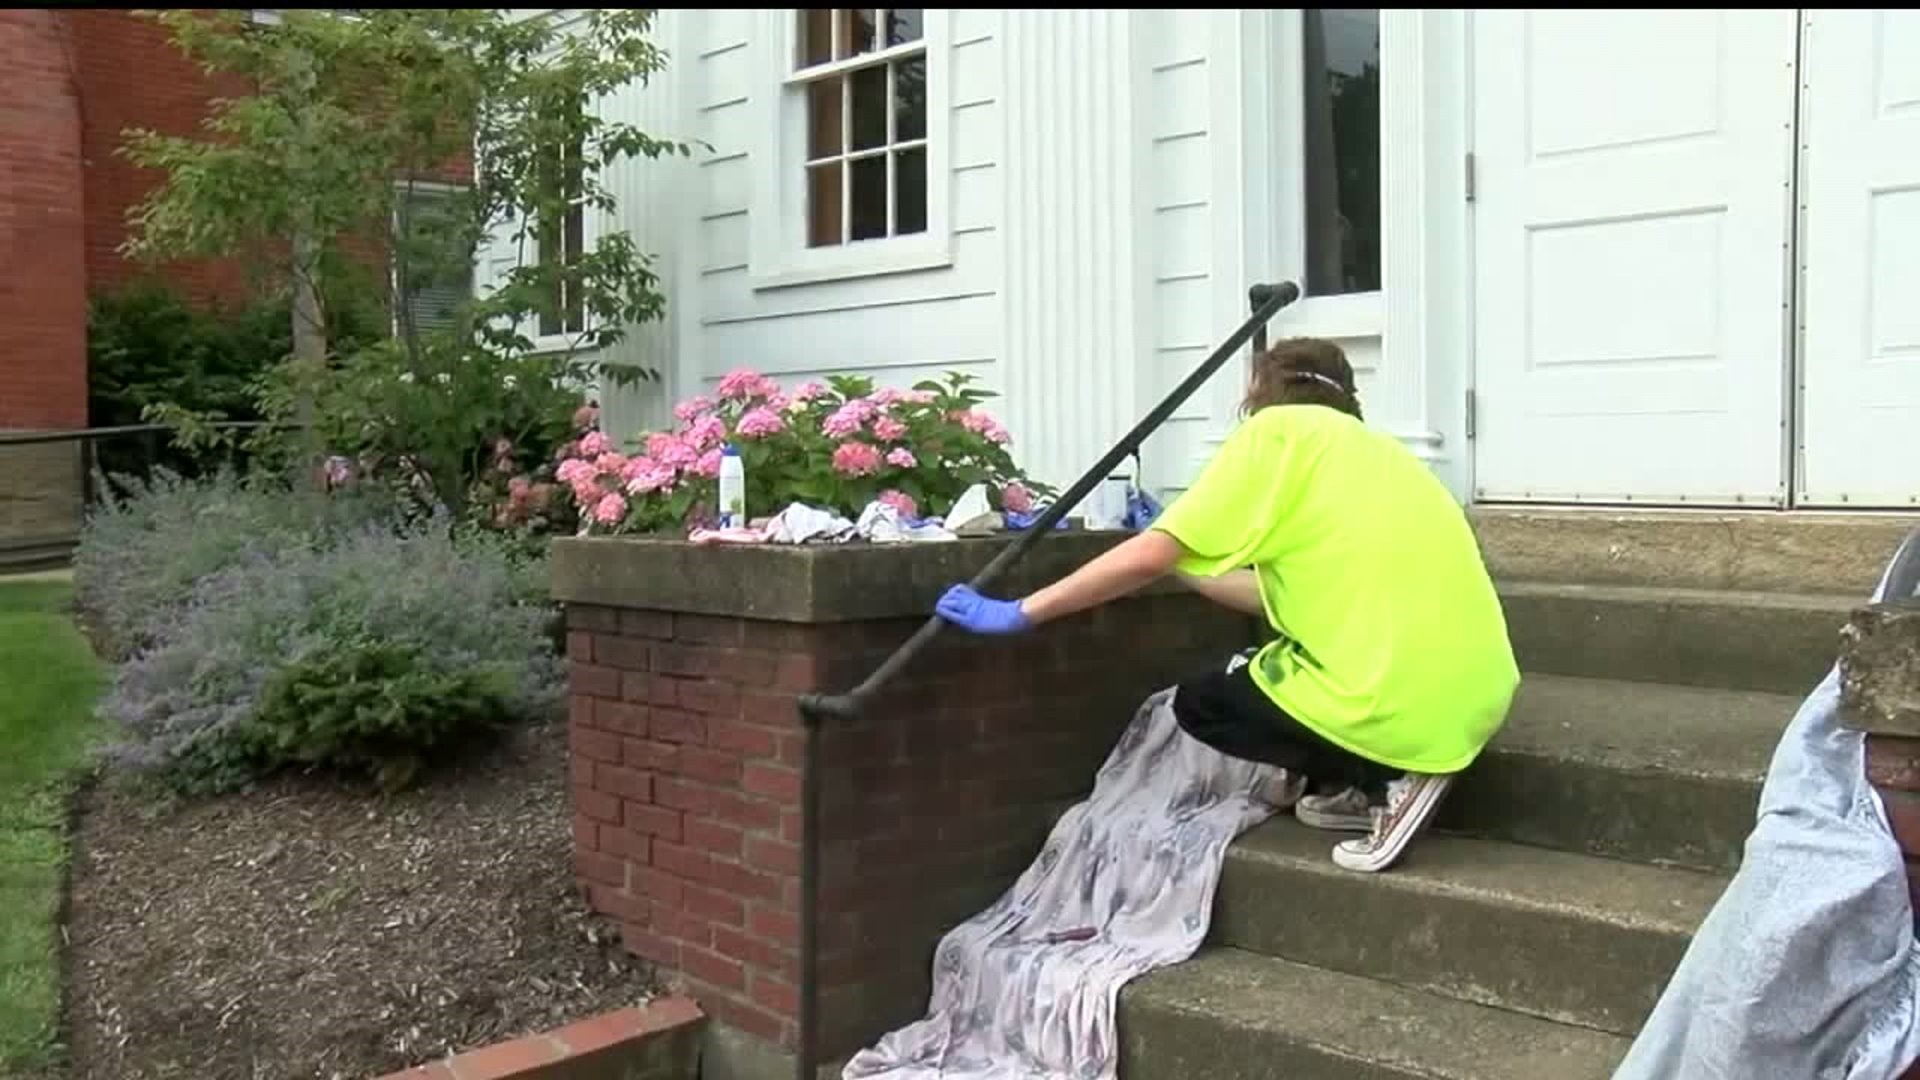 Ohio teen sentenced to painting a railing with a toothbrush